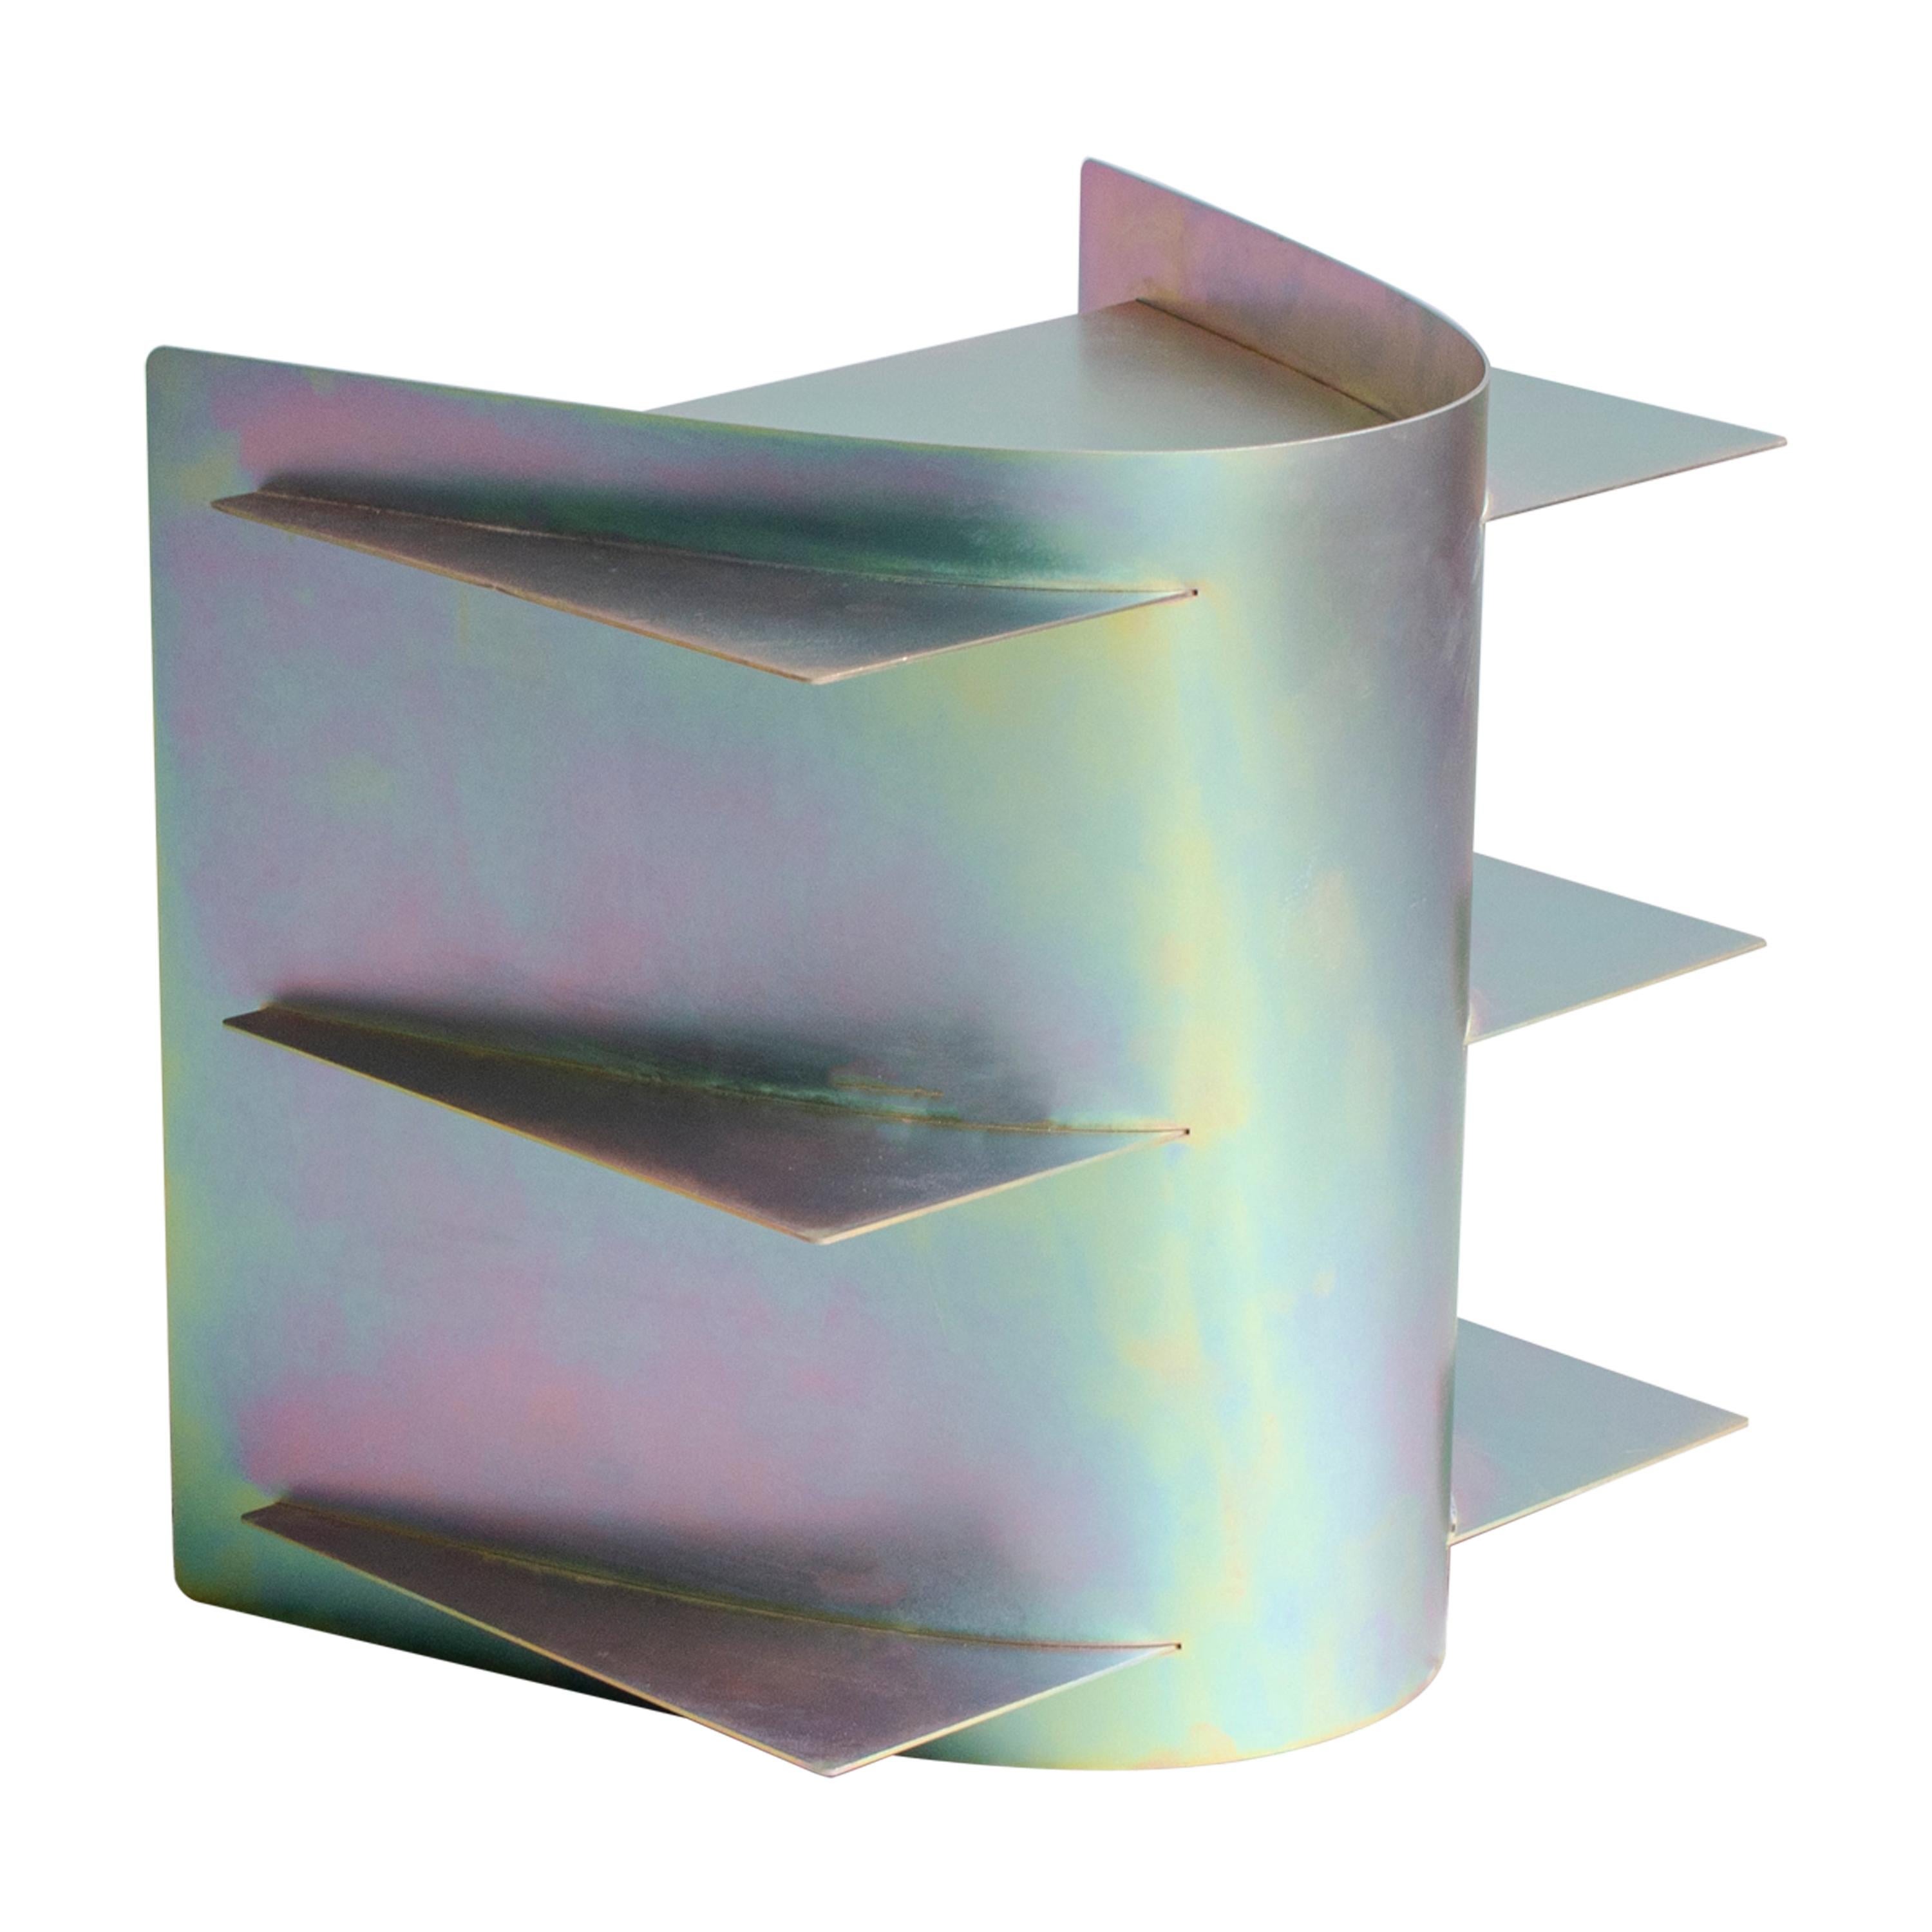 Iridescent Tension Side Table, Paul Coenen